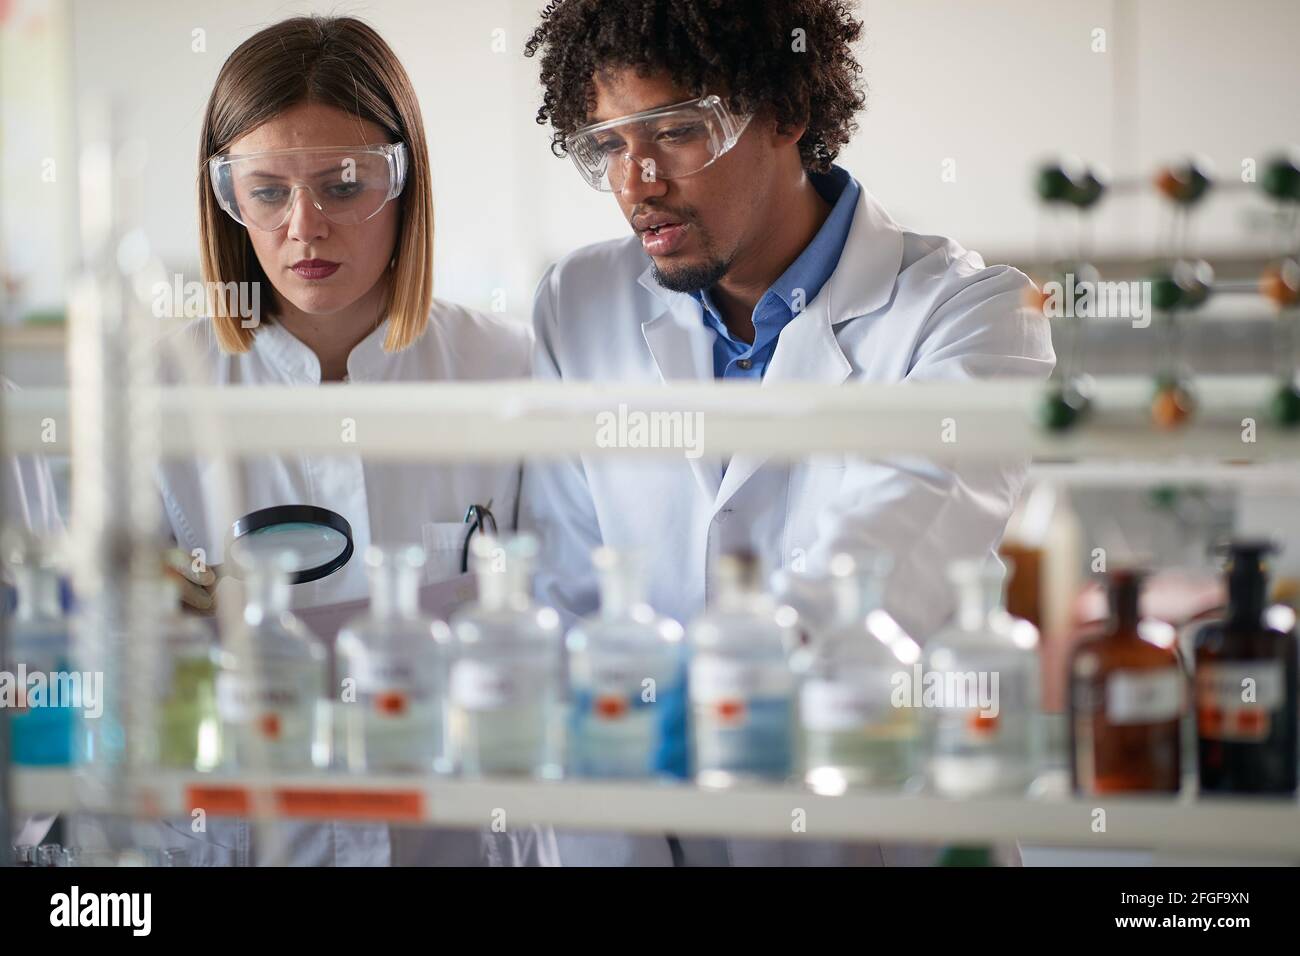 Young students working with a caution with dangerous chemicals in a sterile laboratory enviroment. Science, chemistry, lab, people Stock Photo